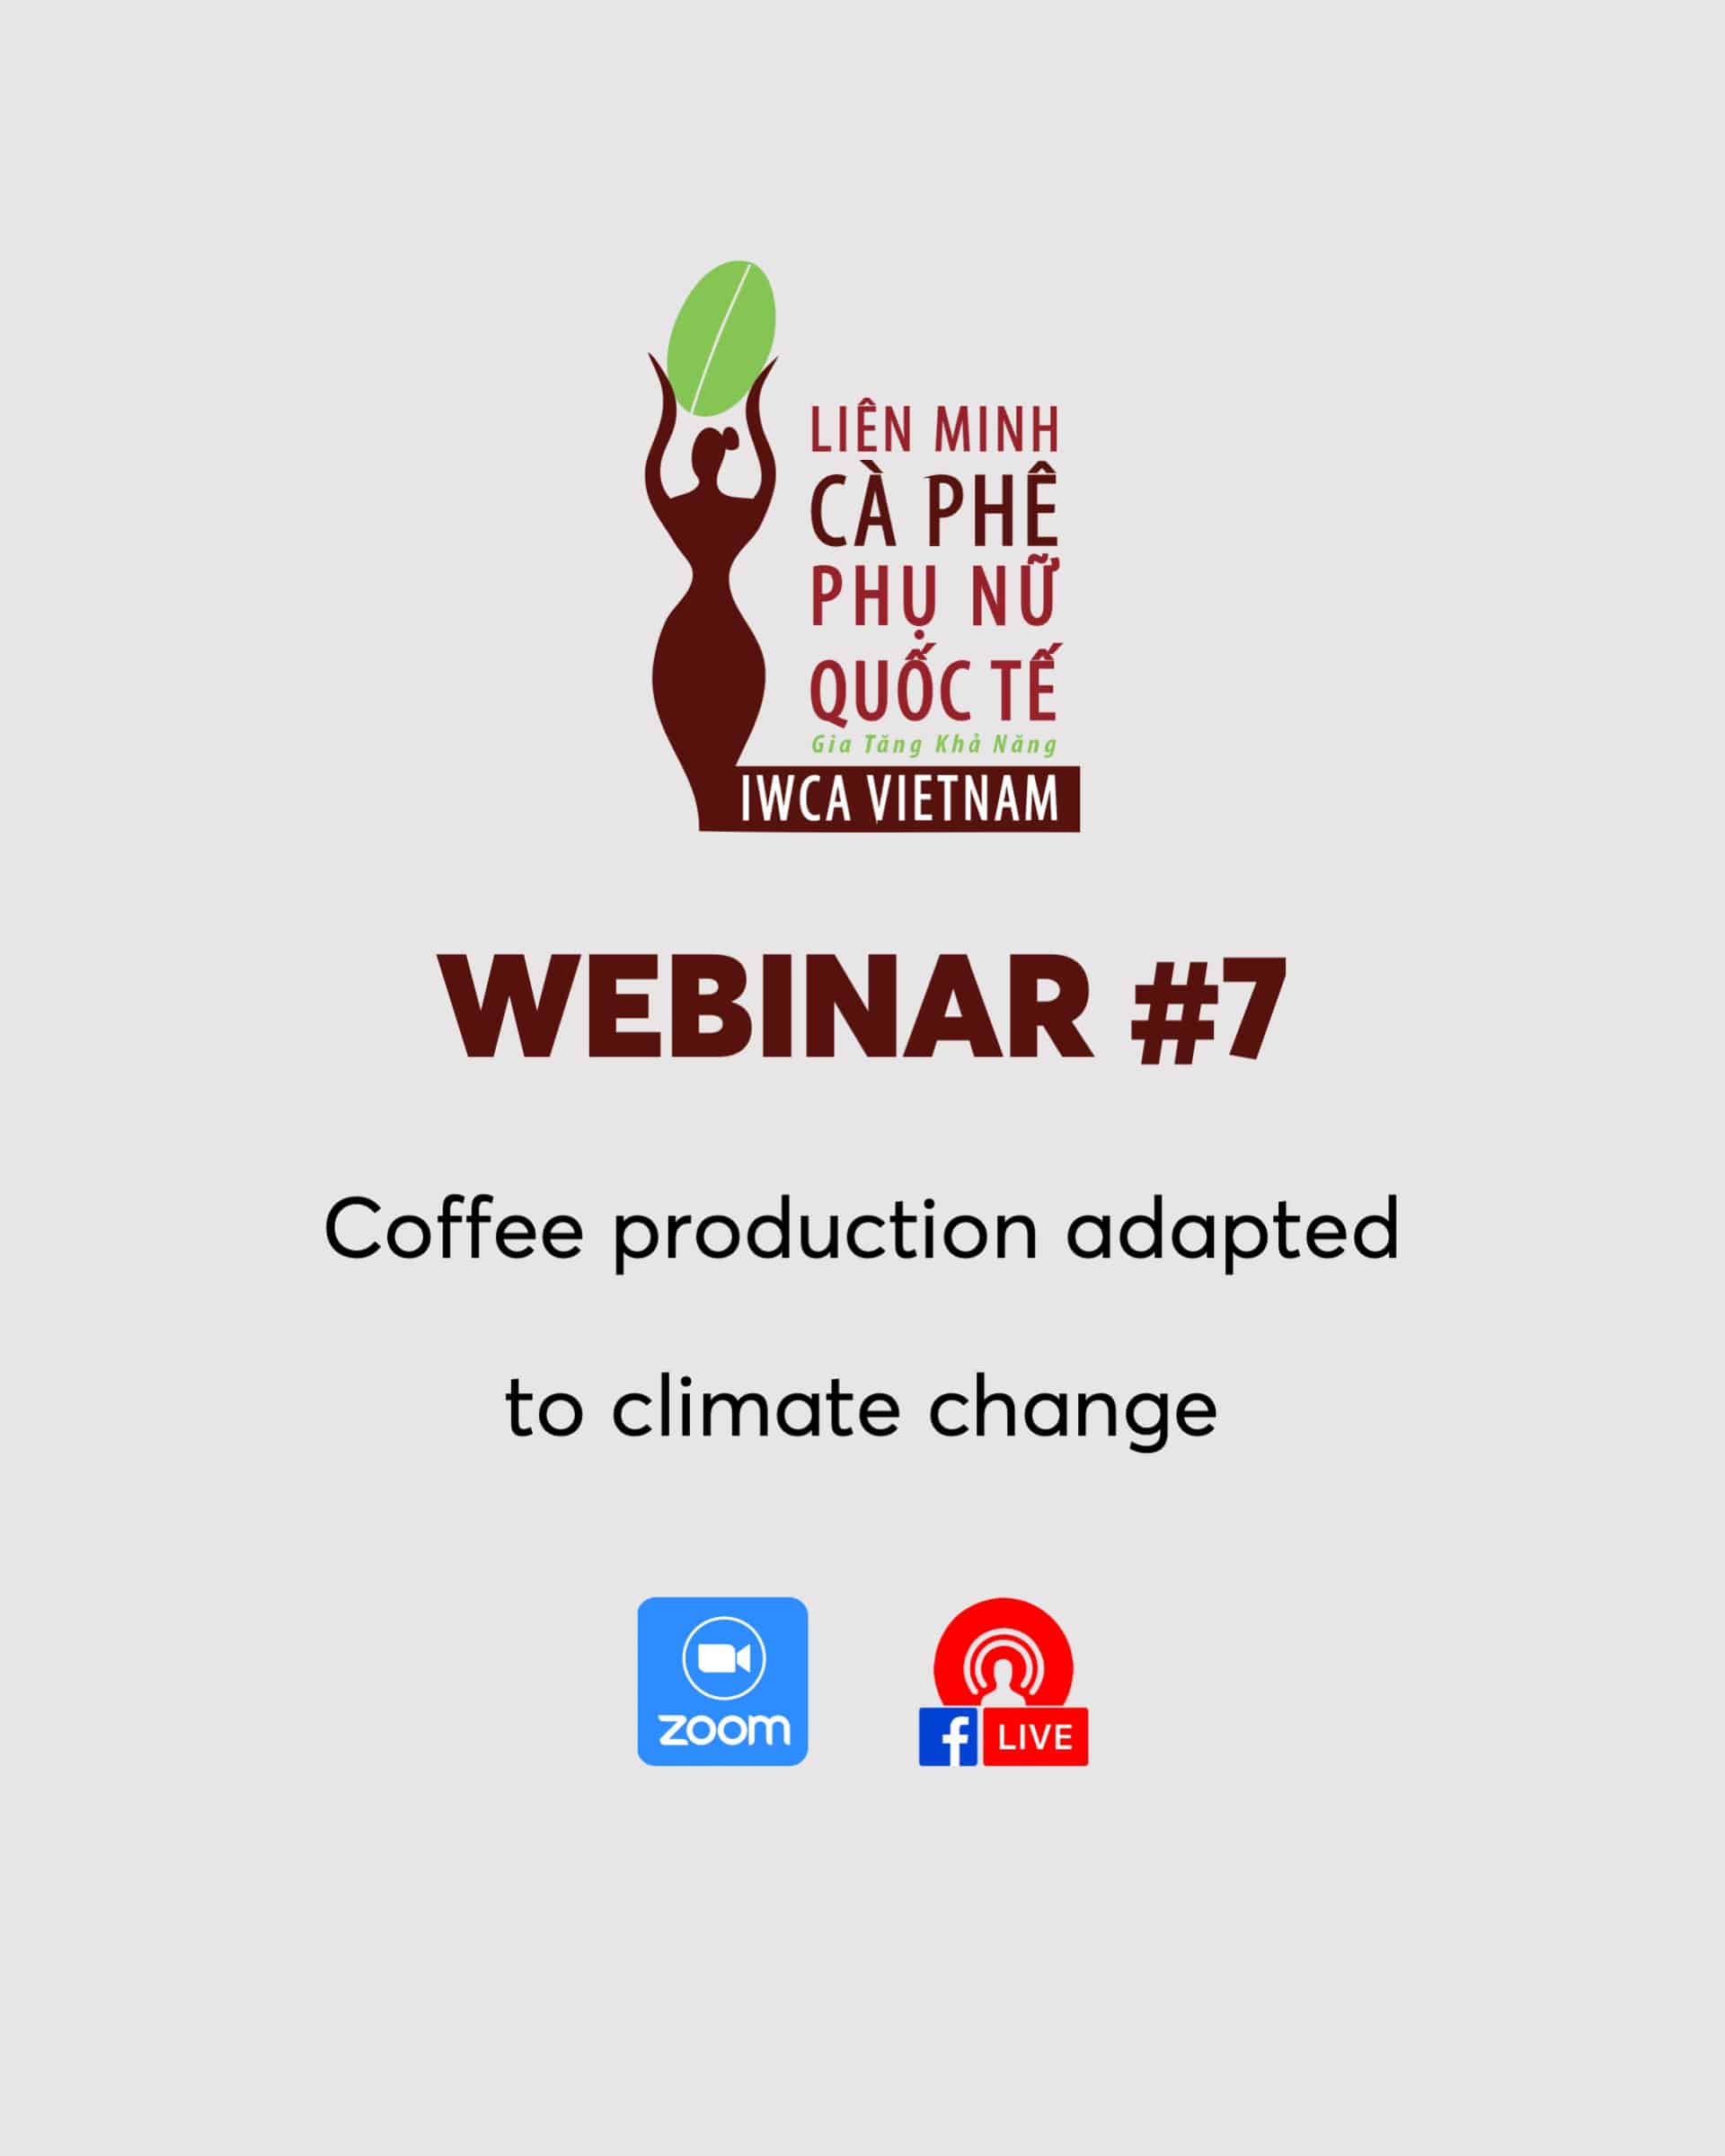 Webinar #7: Coffee production adapted to climate change